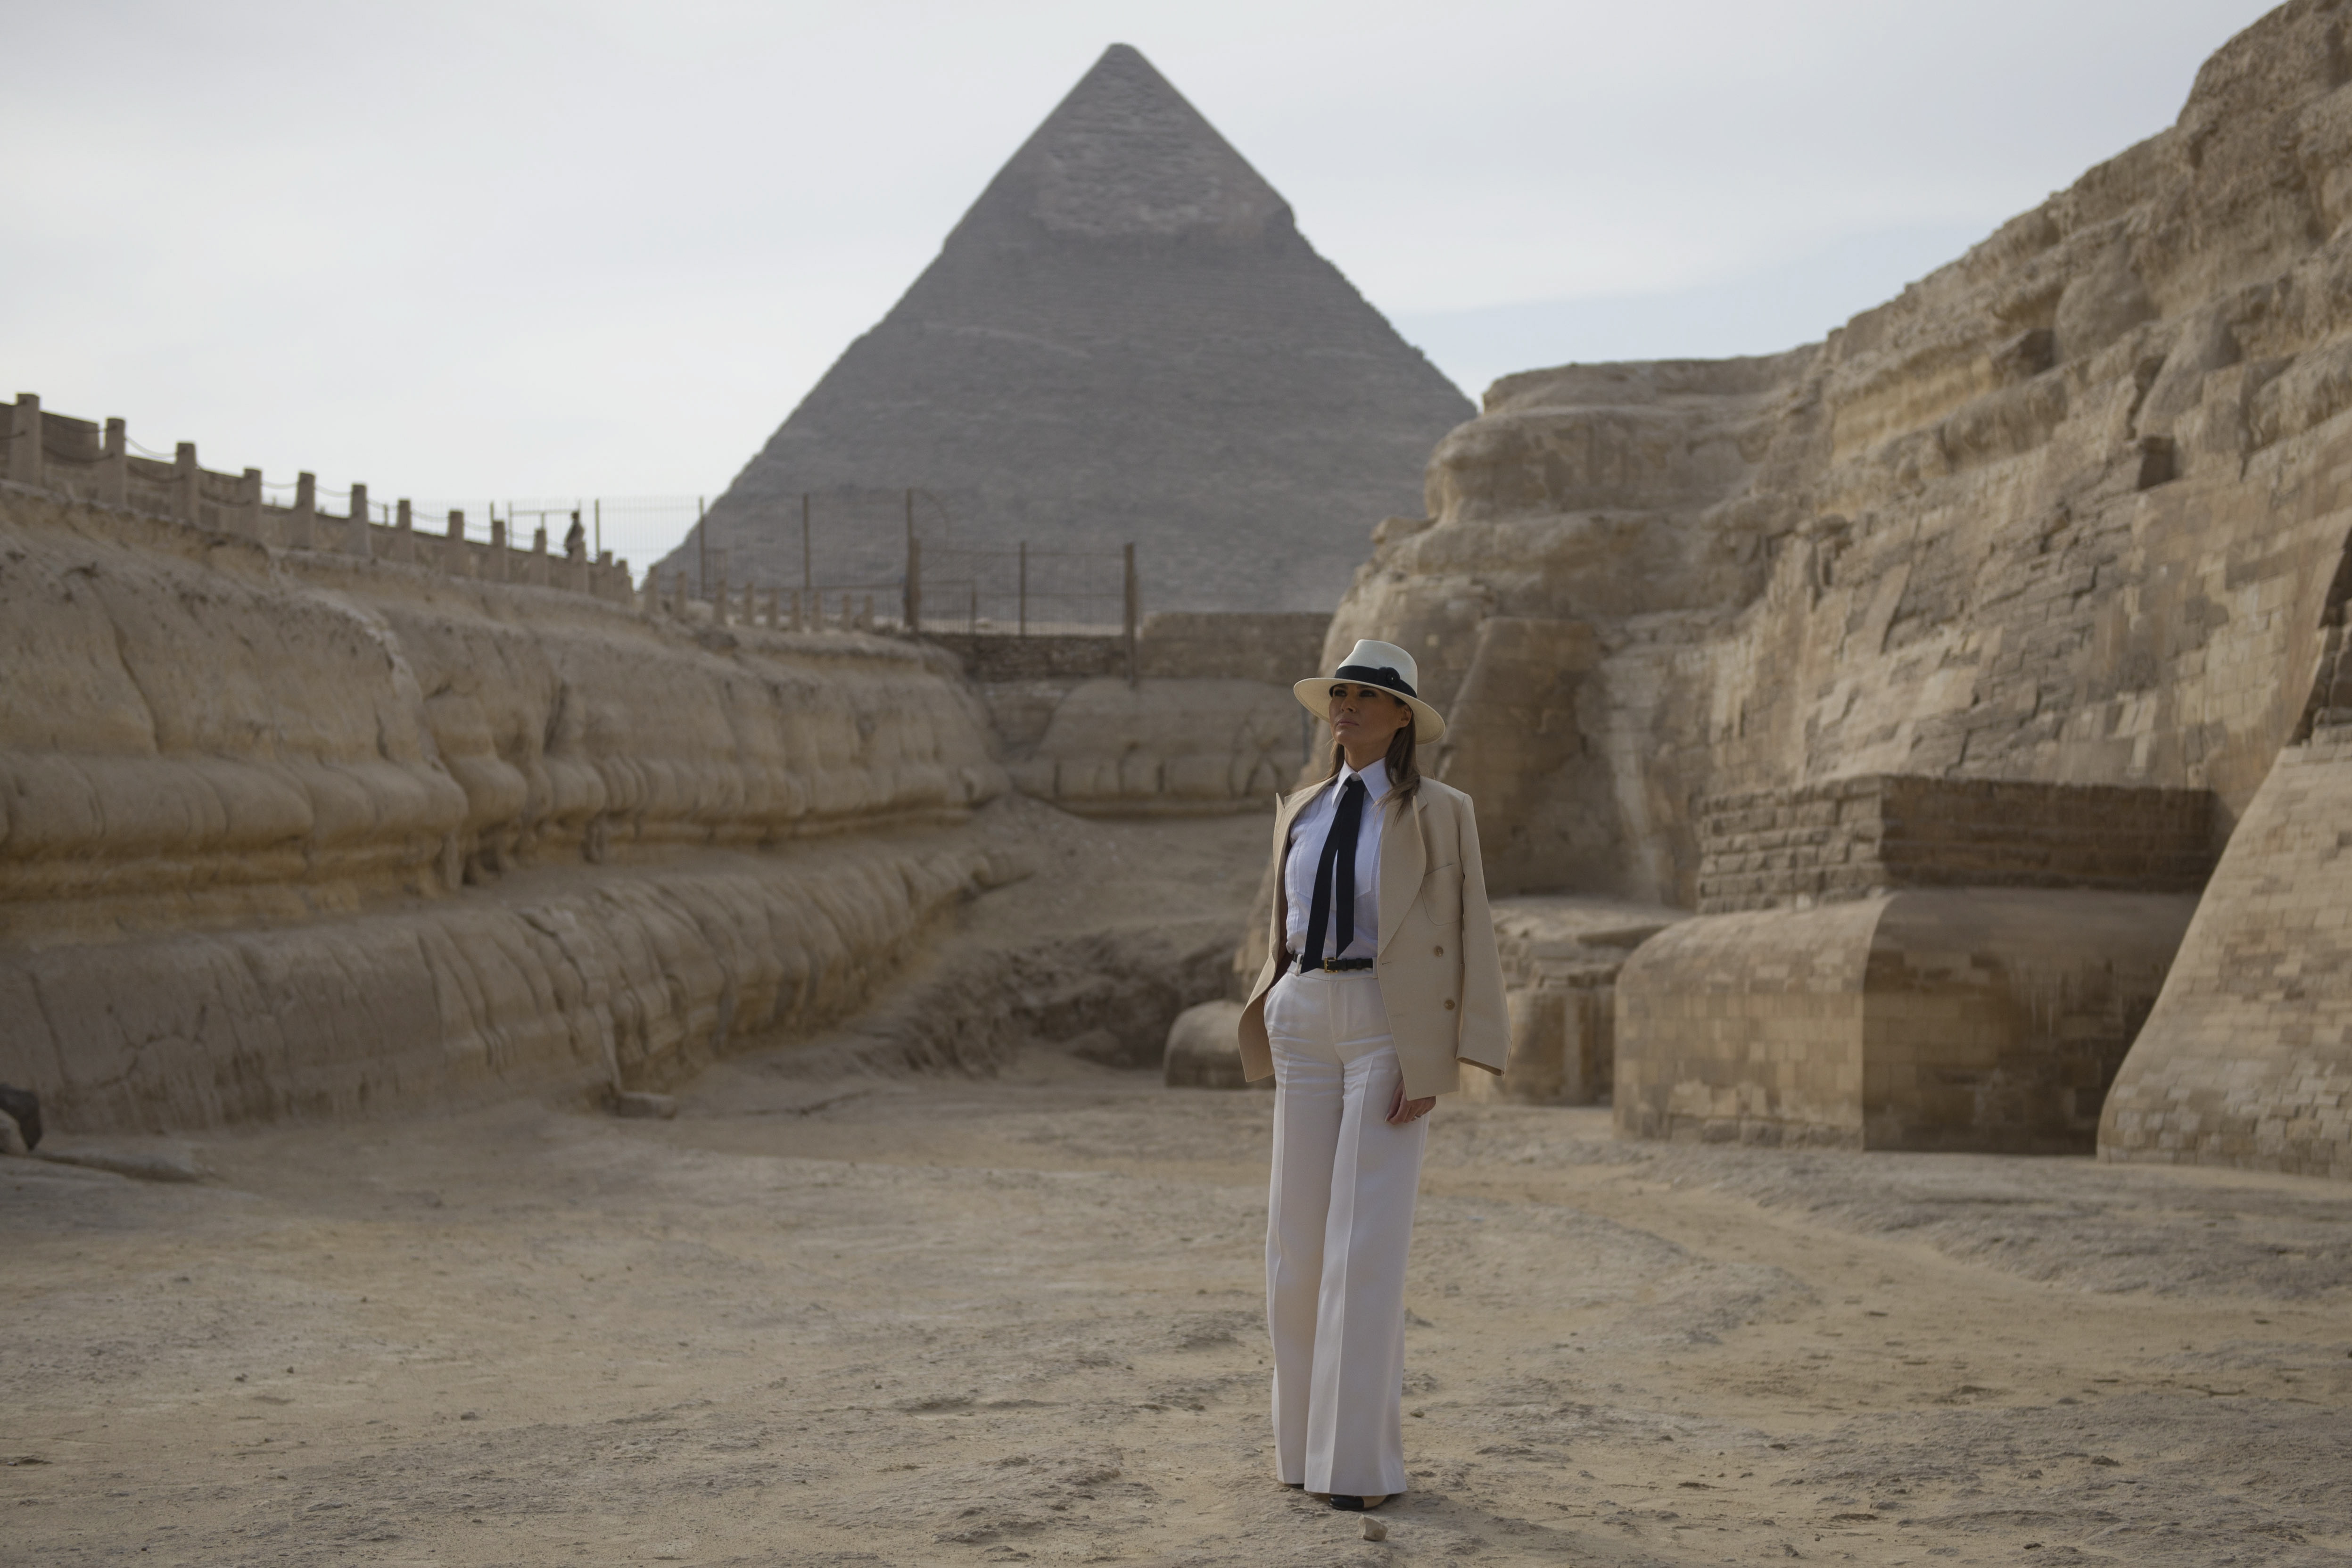 epa07074226 US First Lady Melania Trump poses for a photo in front of the Giza Pyramids and Sphinx in Giza, Egypt, 06 October 2018. This is the first major solo international trip to Africa for the US First Lady, where she is promoting child welfare and education during her visit to Ghana, Malawi, Kenya and Egypt.  EPA/MOHAMED HOSSAM